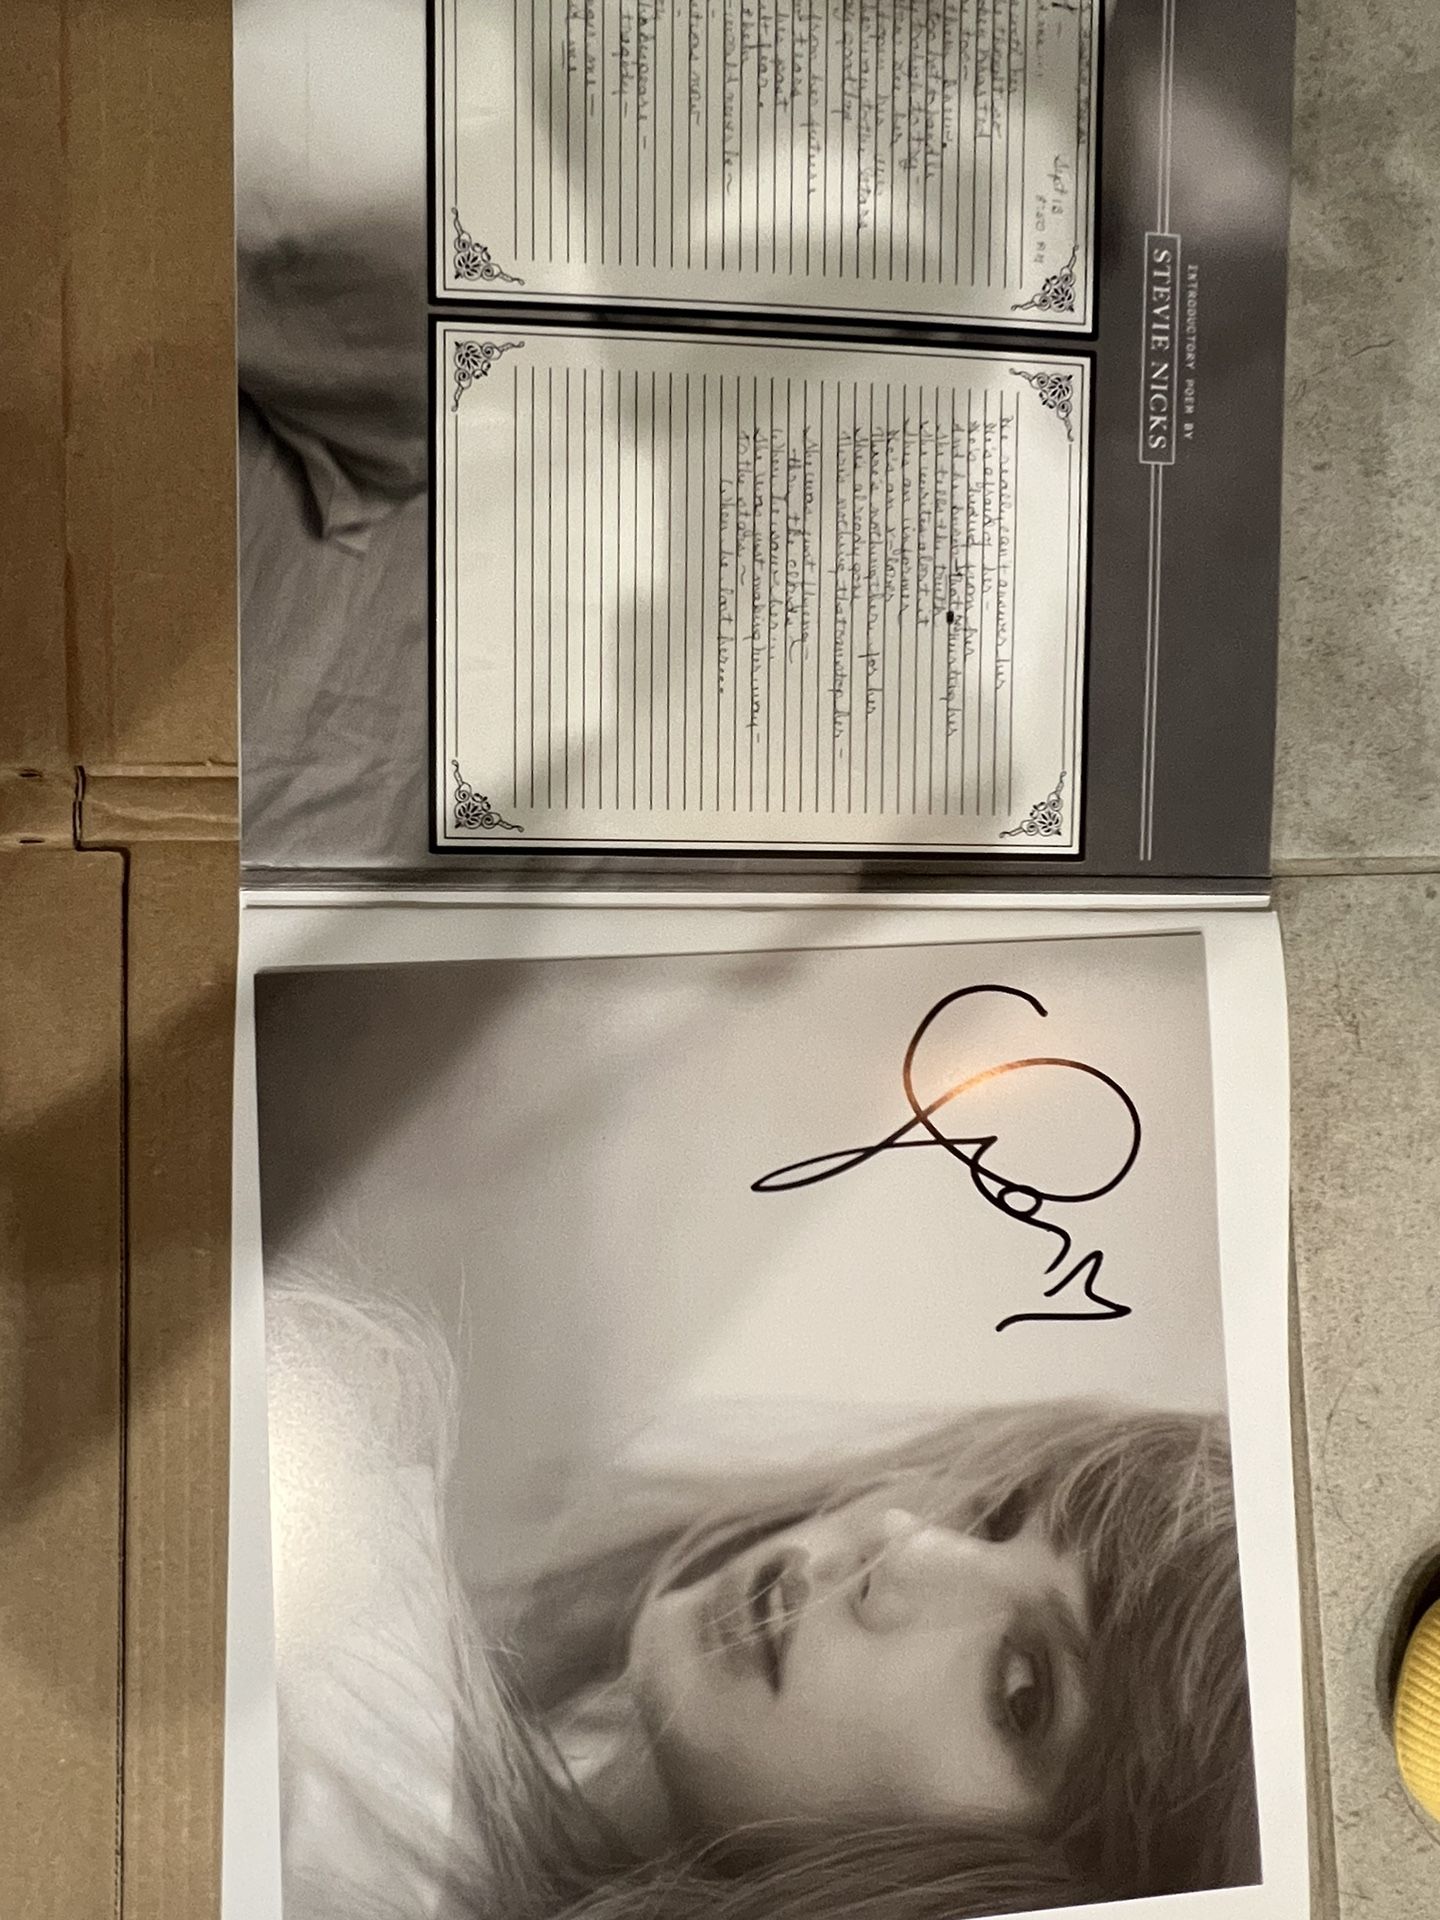 Taylor Swift Signed The Tortured Poets Department Vinyl The Manuscript w/ Heart